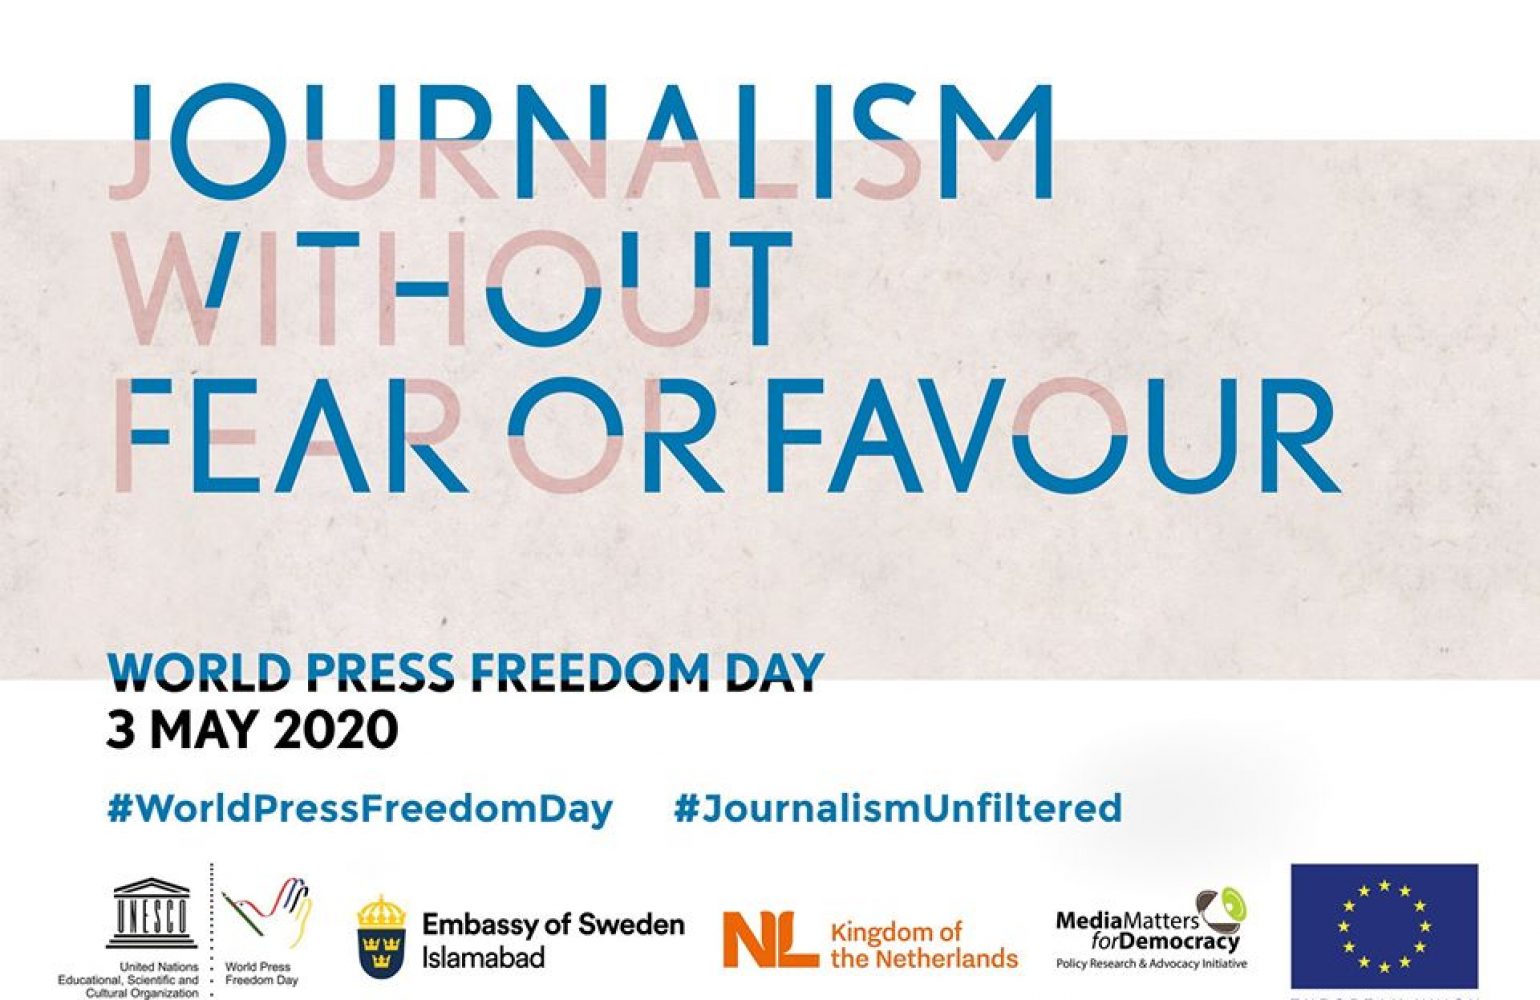 Media Matters for Democracy, along with EU Pakistan, UNESCO, and Swedish Embassy digitally commemorates the World Press Freedom Day 2020